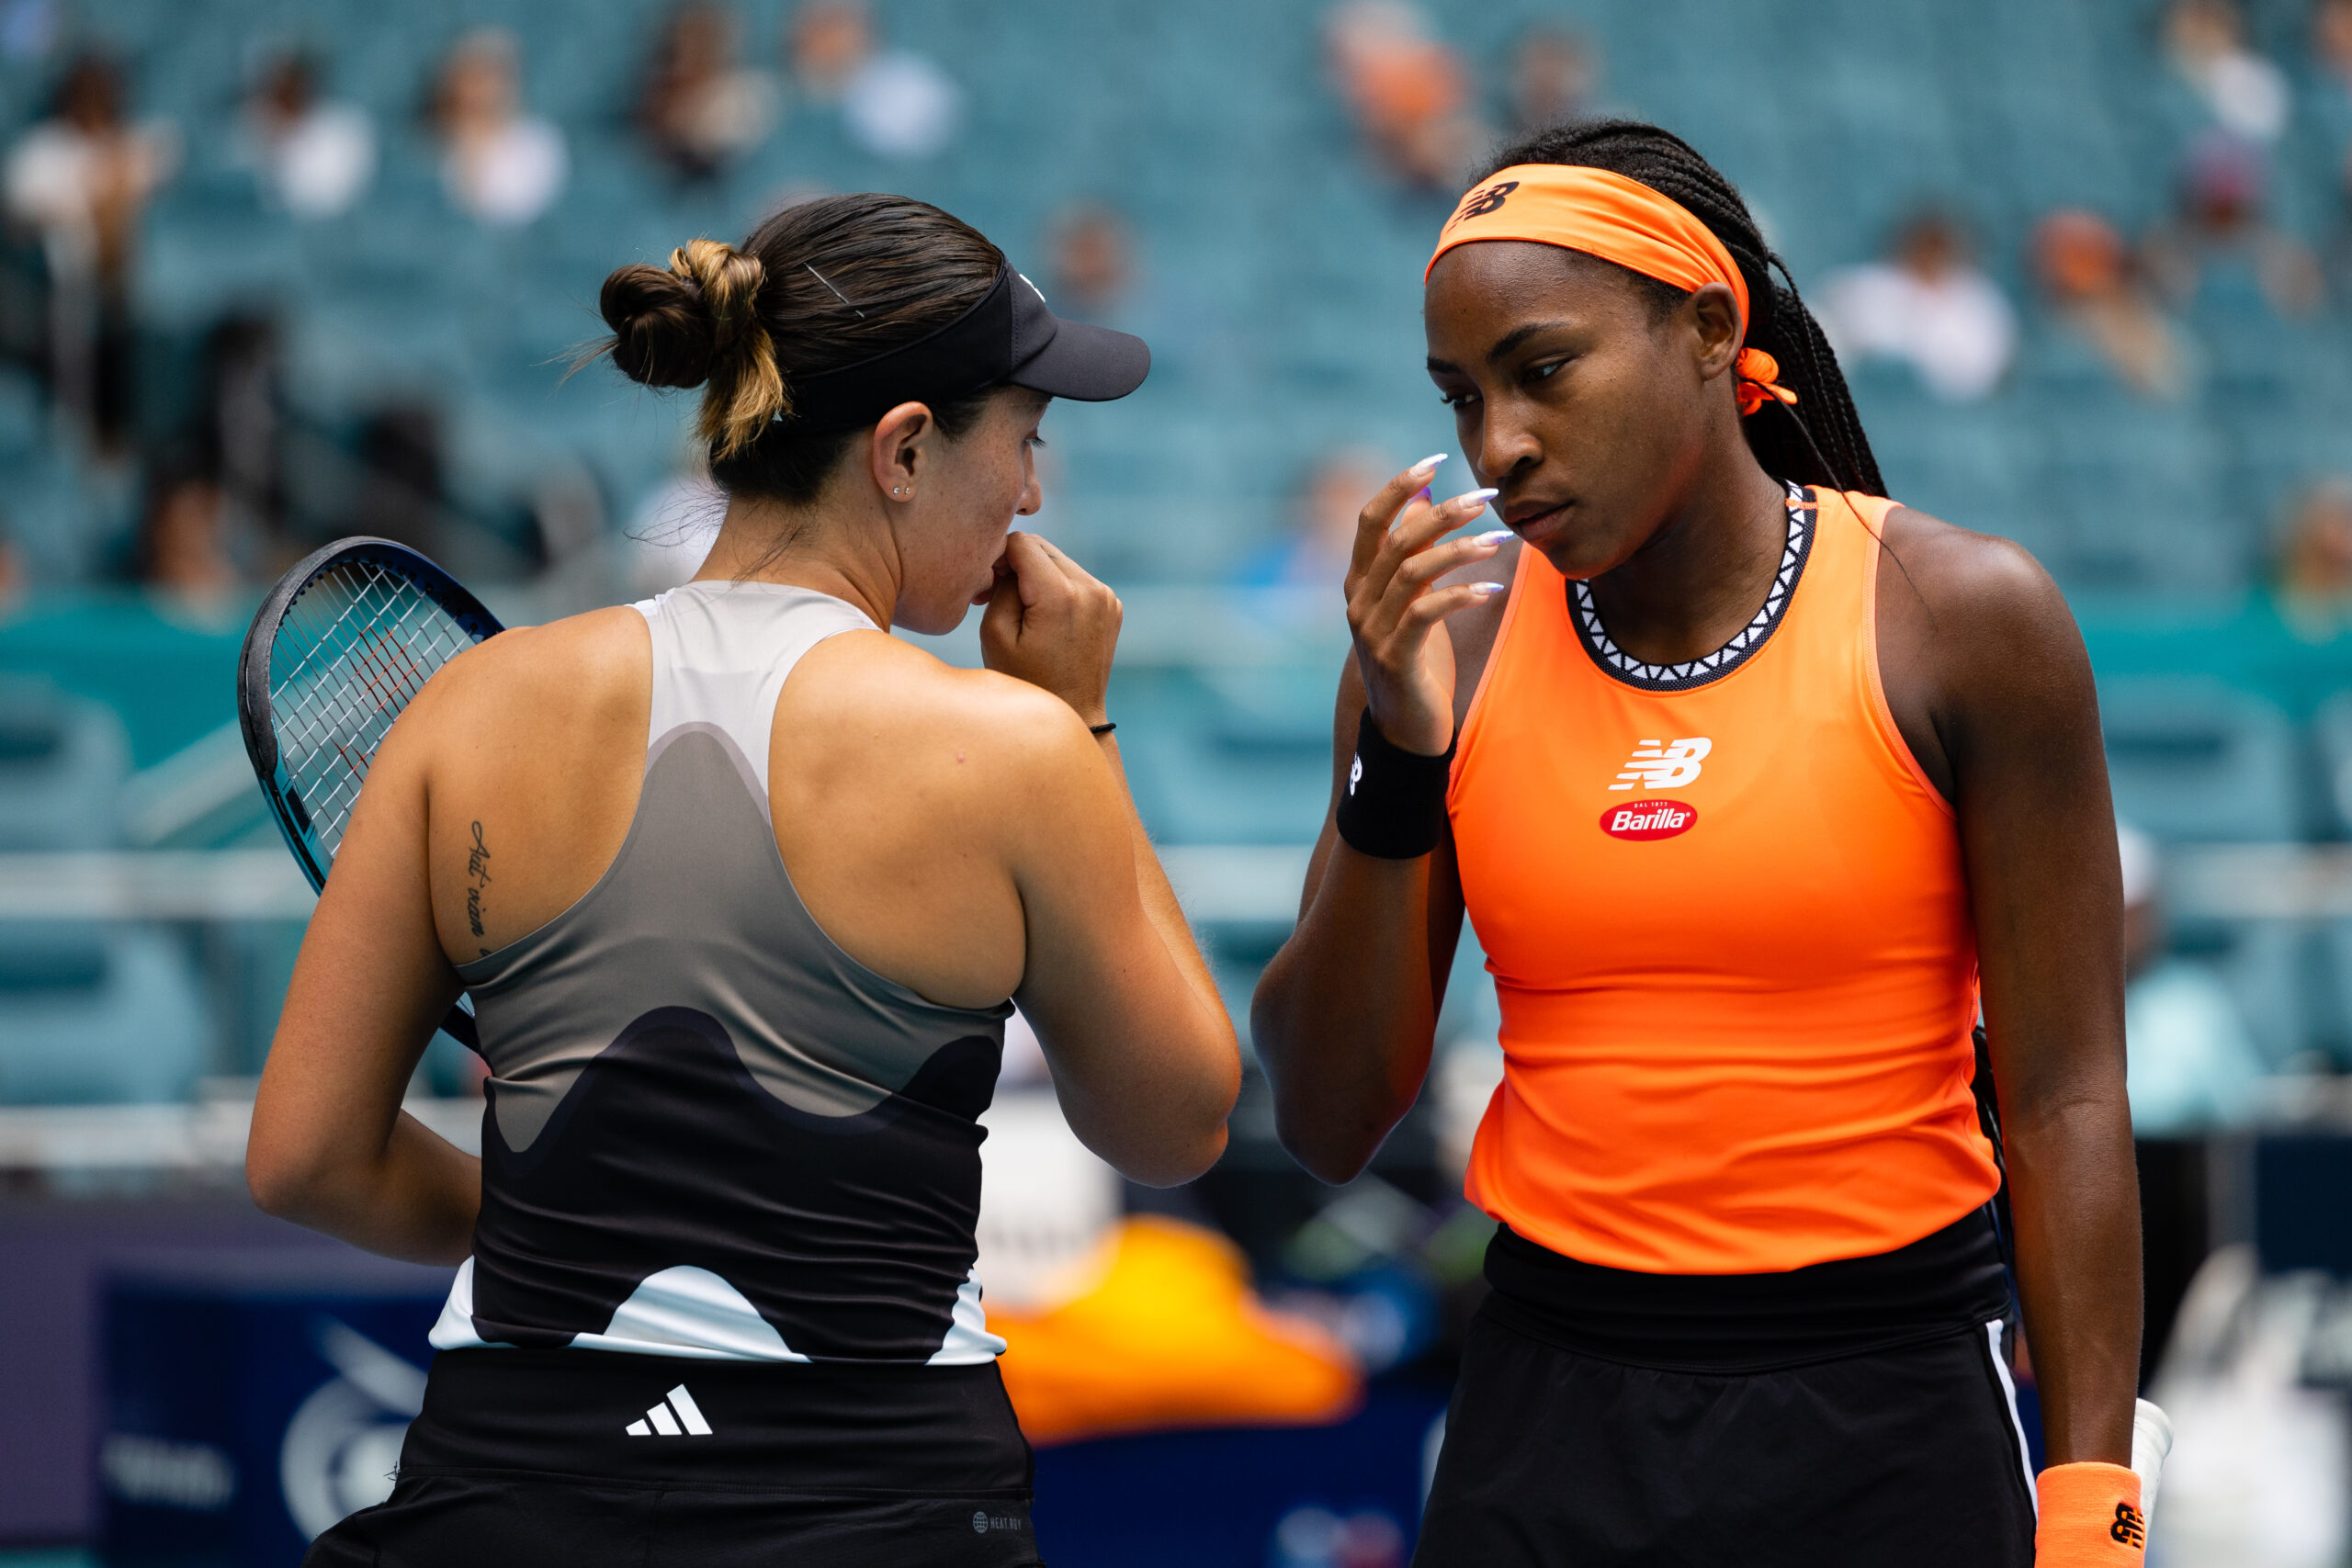 Jessica Pegula and Coco Gauff discuss strategy during the 2023 Miami Open Women's Doubles Final on April 2, 2023.